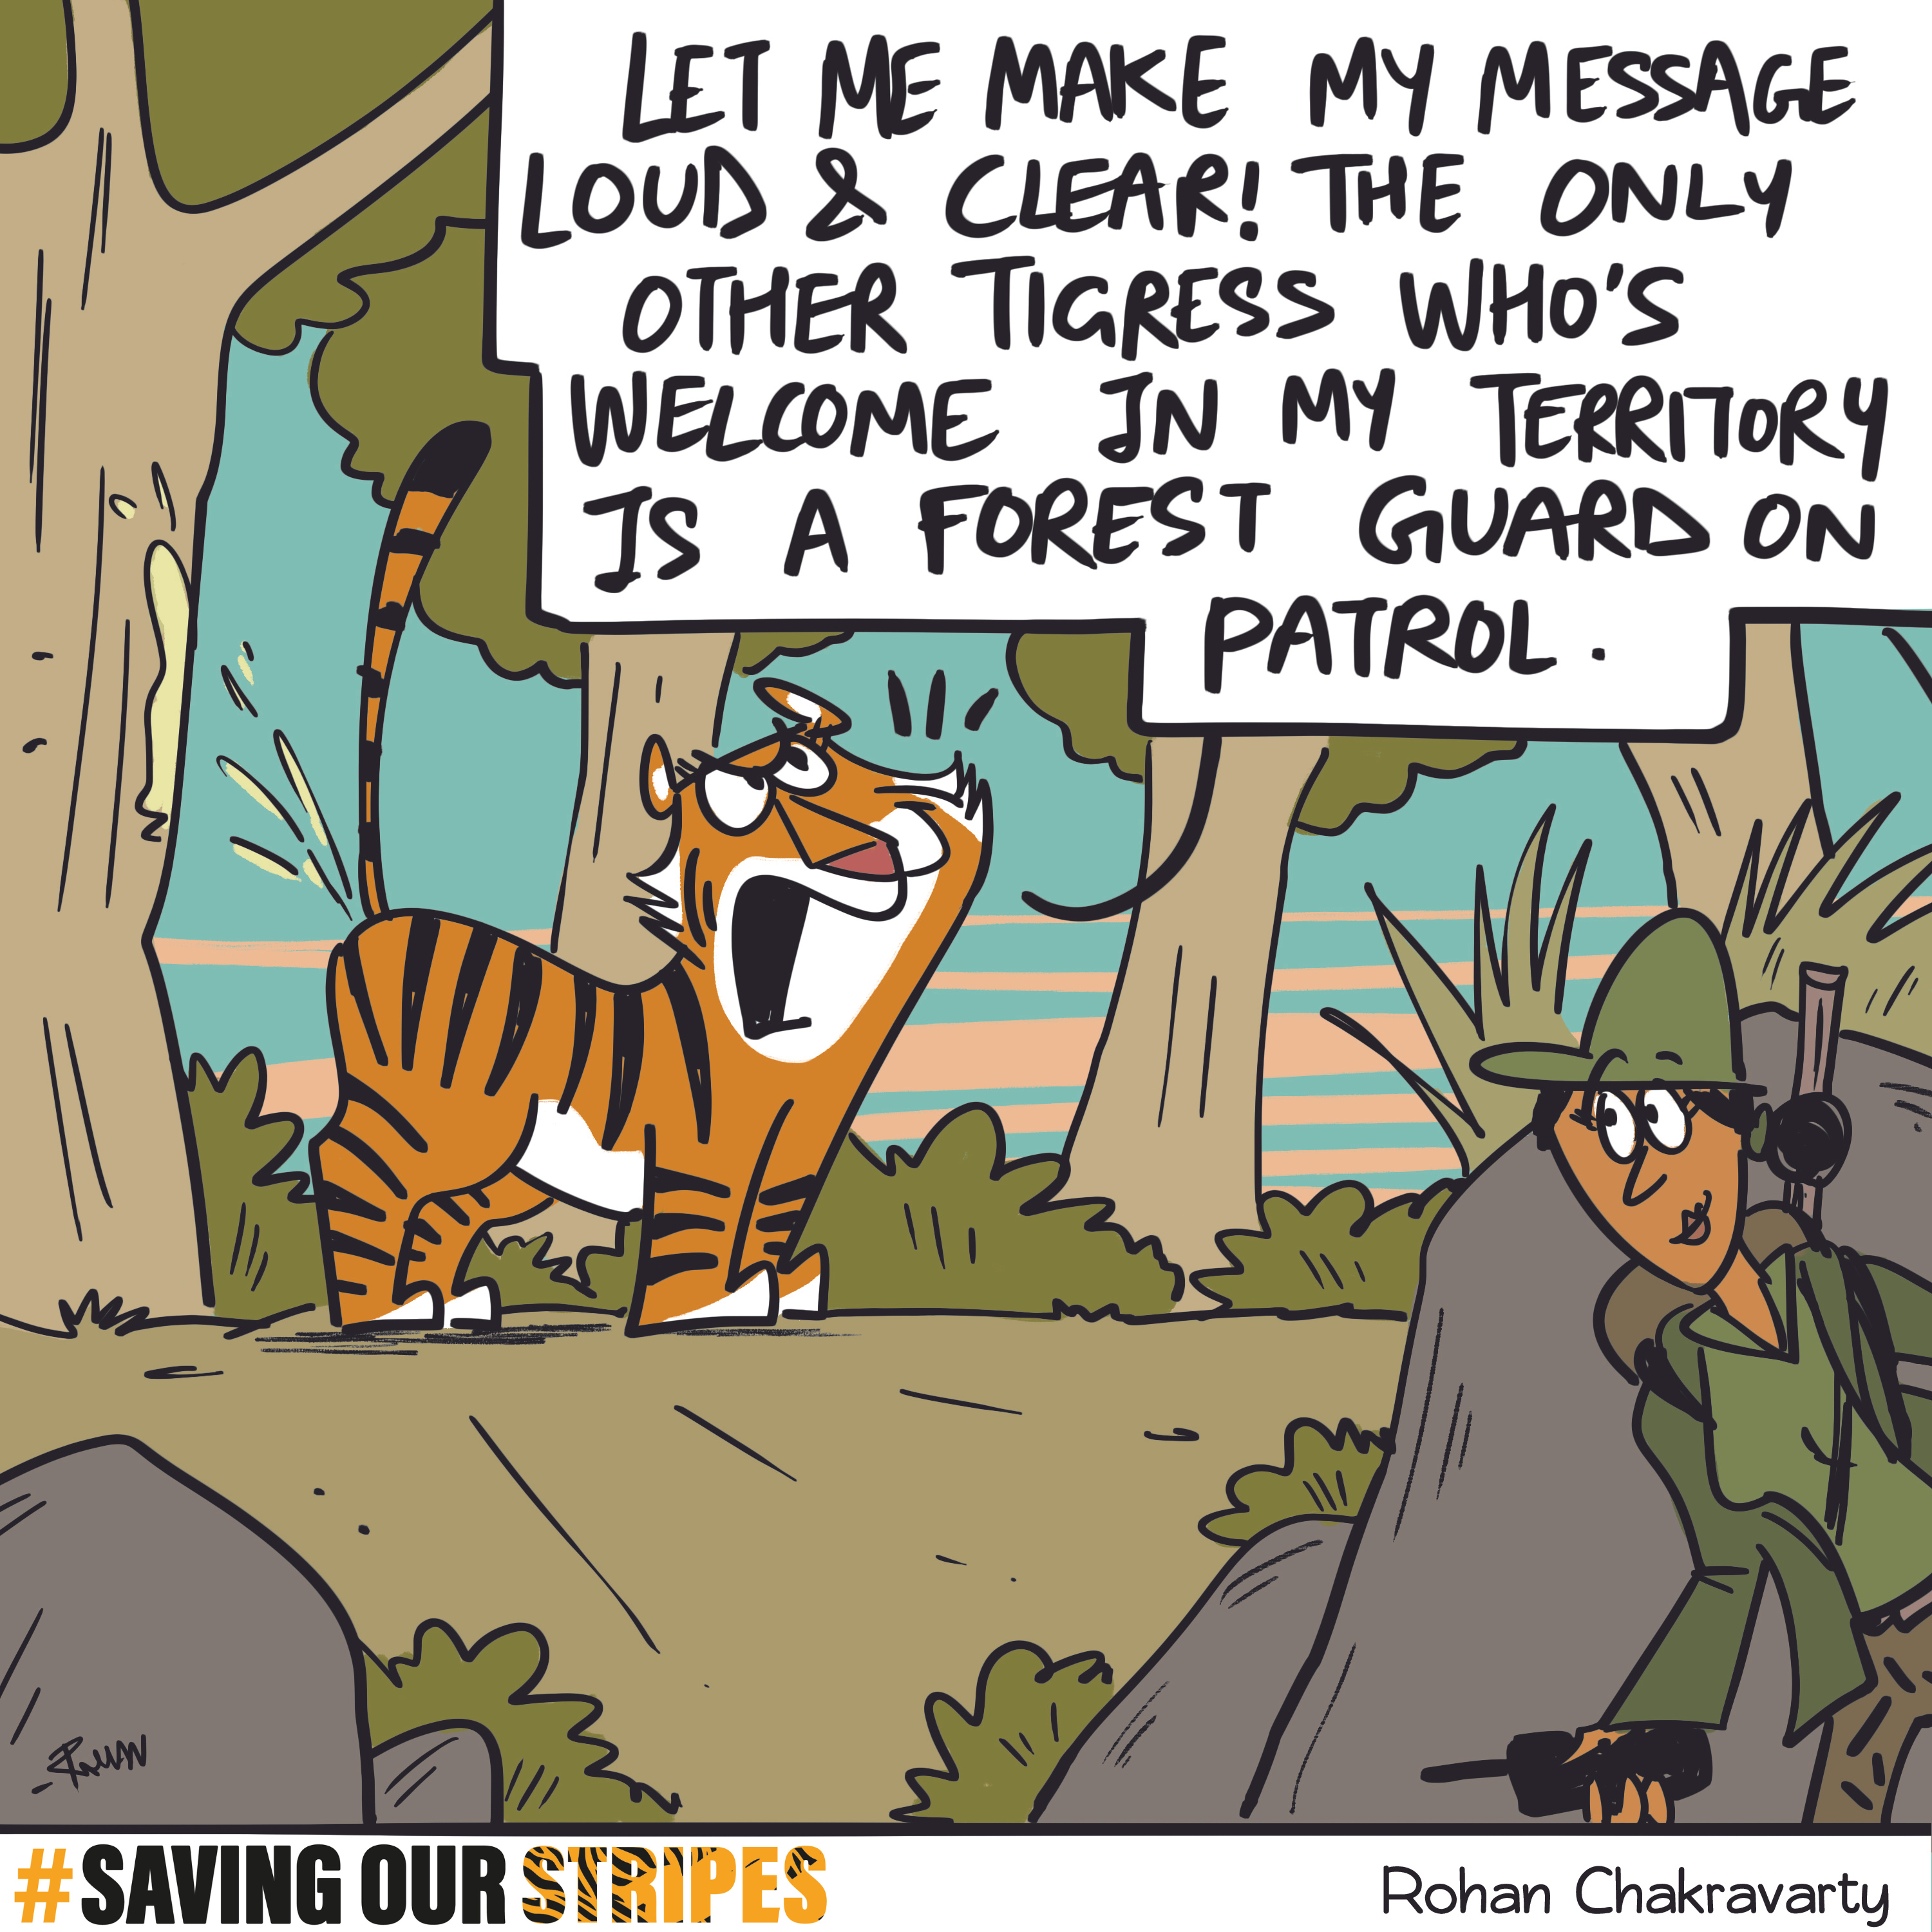 The only Tigress who's welcomed in the territory is a Forest Guard on Patrol